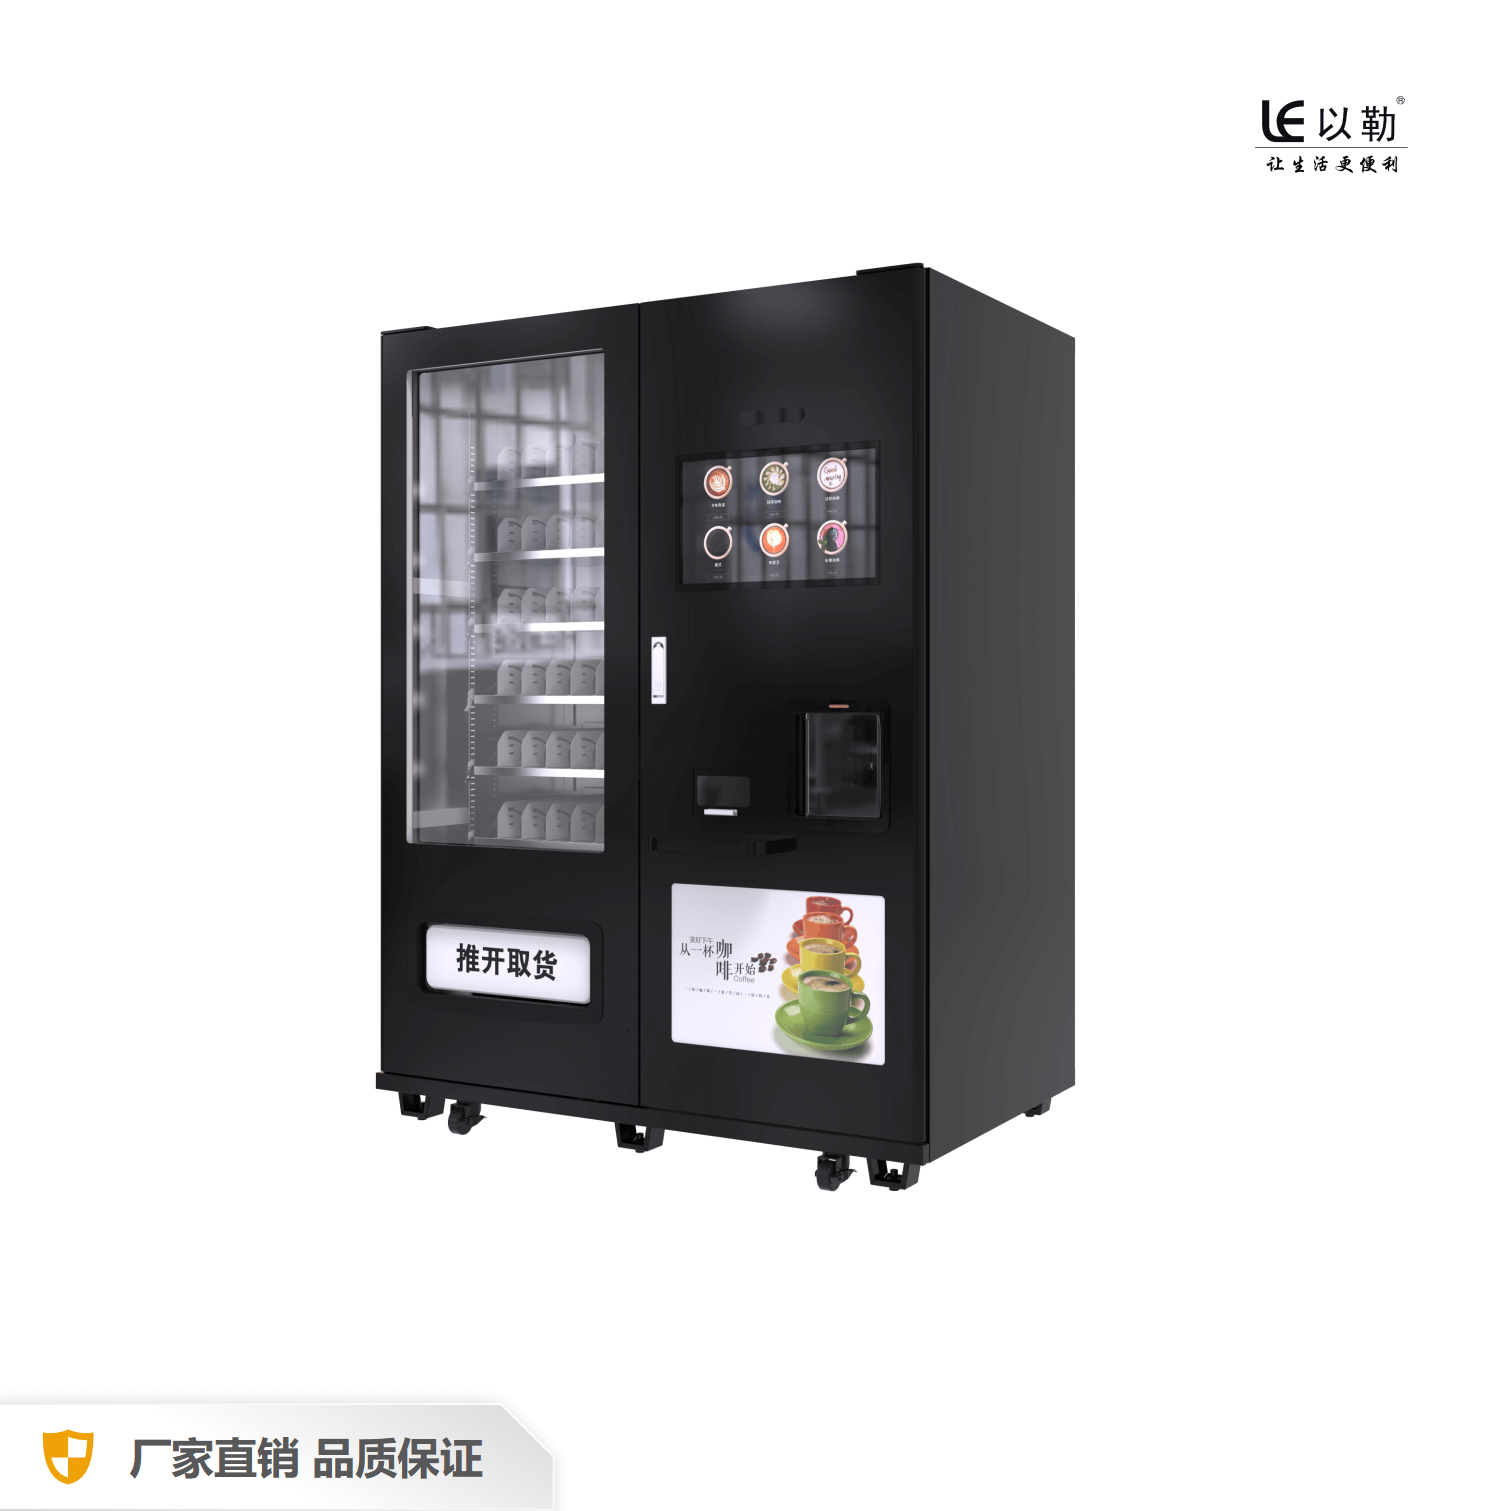 Automatic Book Drink And Snack Coffee Vending Machine